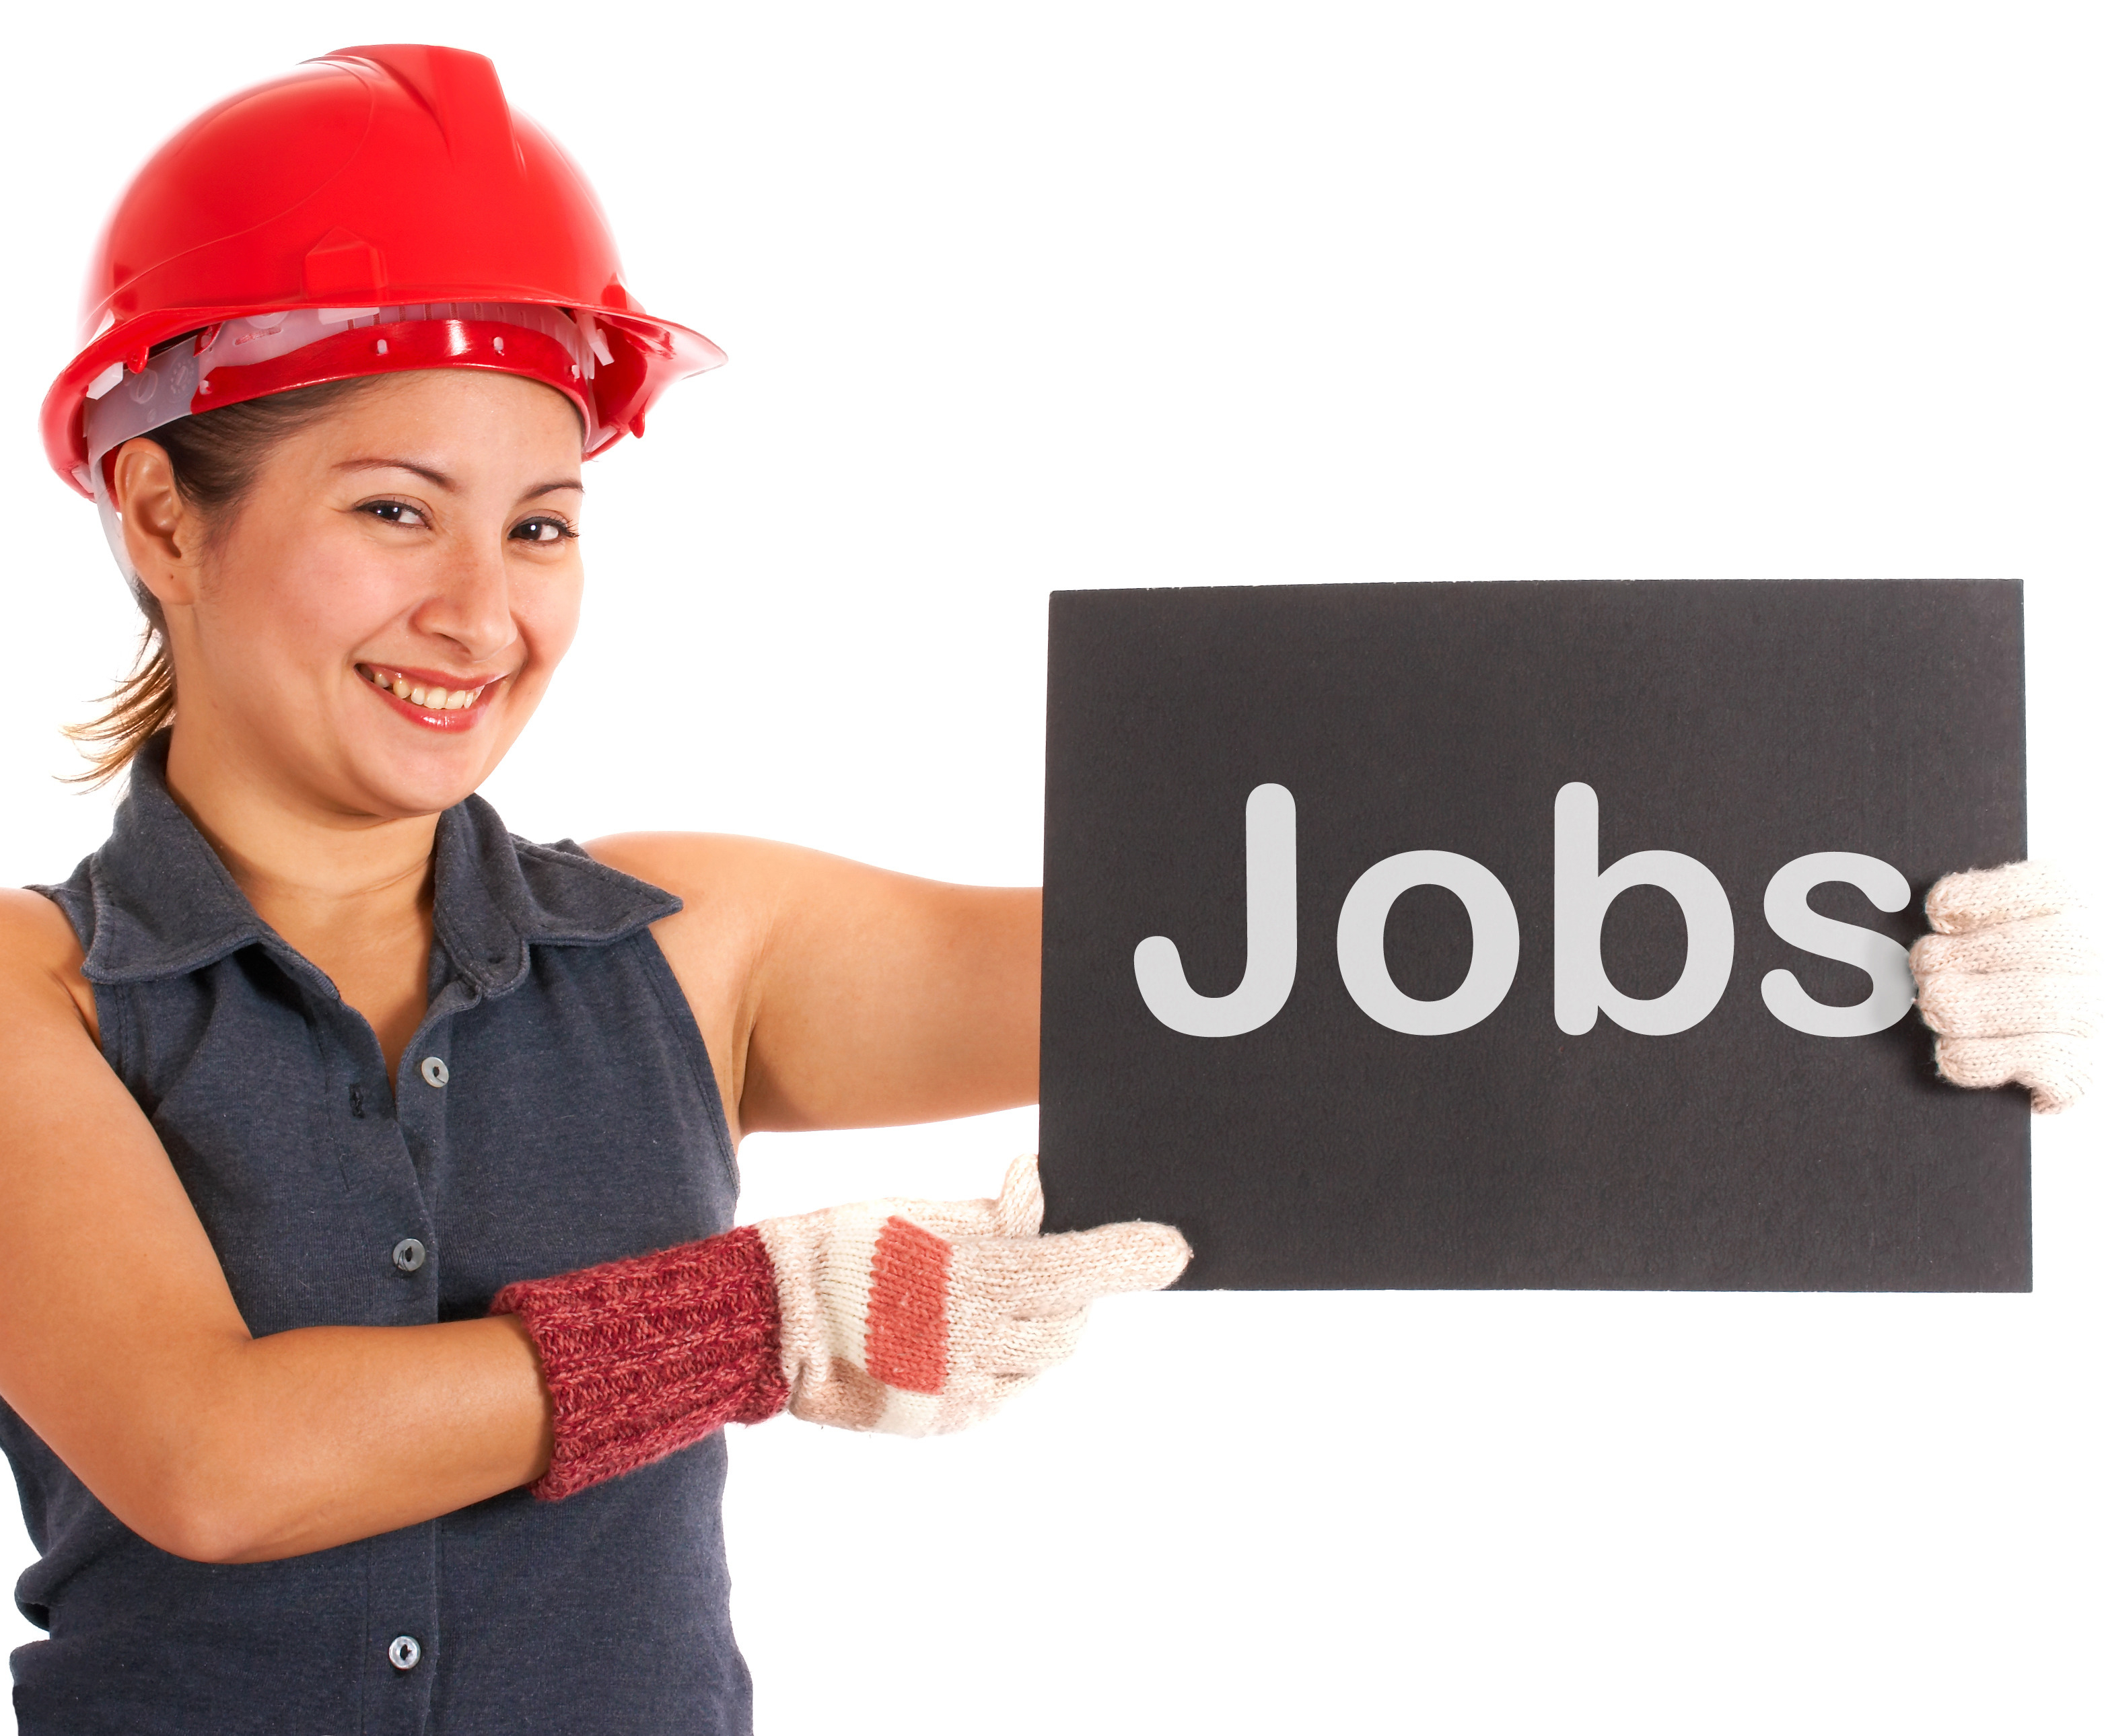 jobs sign with construction worker showing careers fyqr0EwO